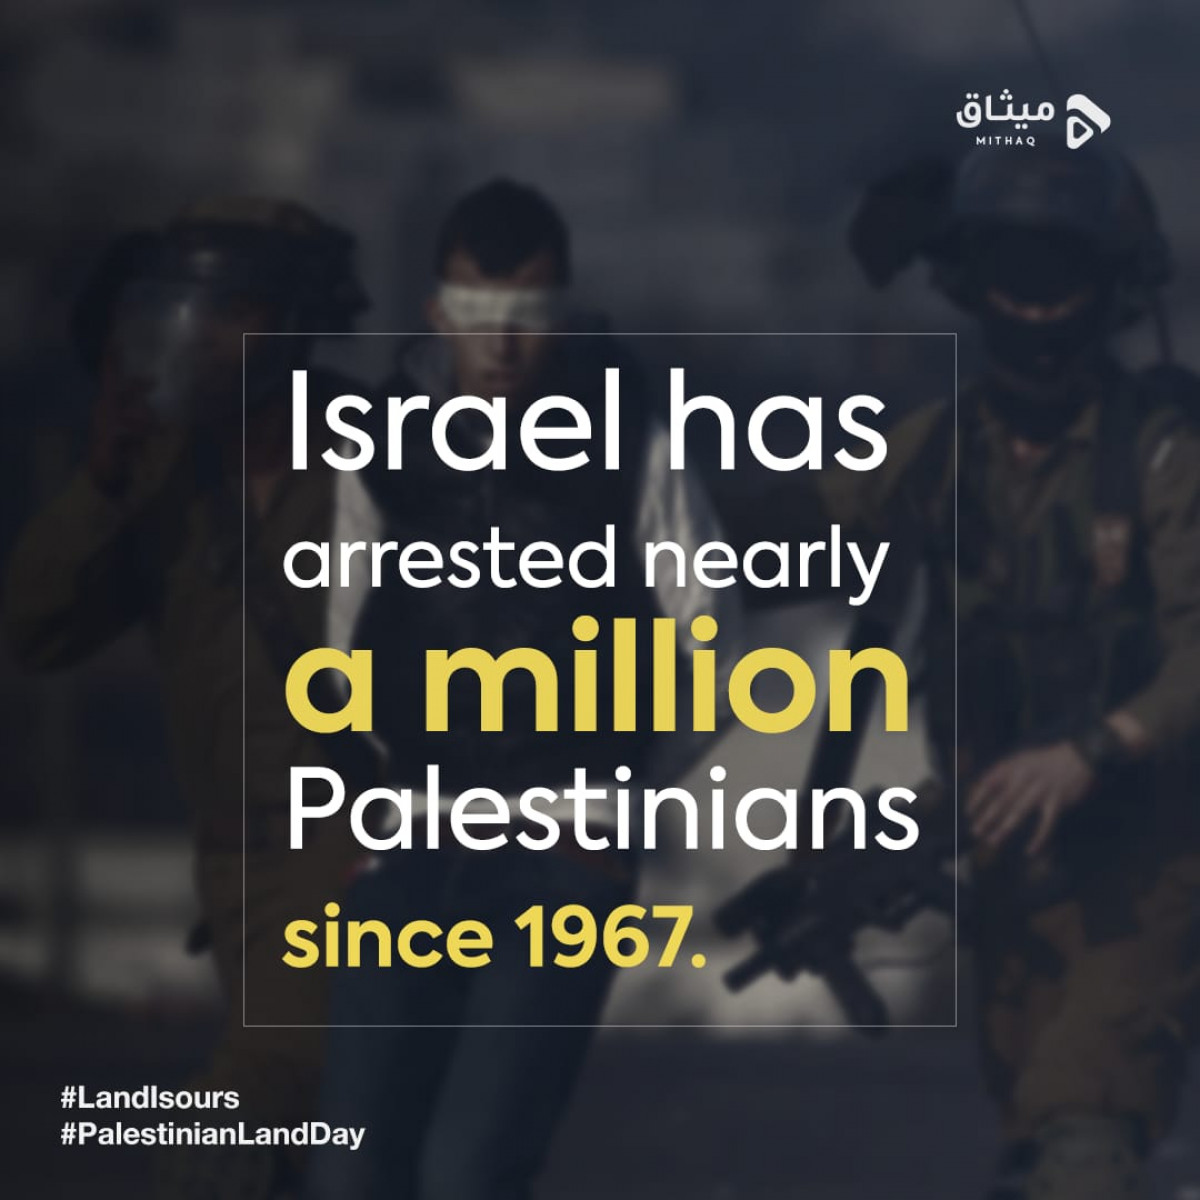 Israel has arrested nearly a million Palestinians since 1967